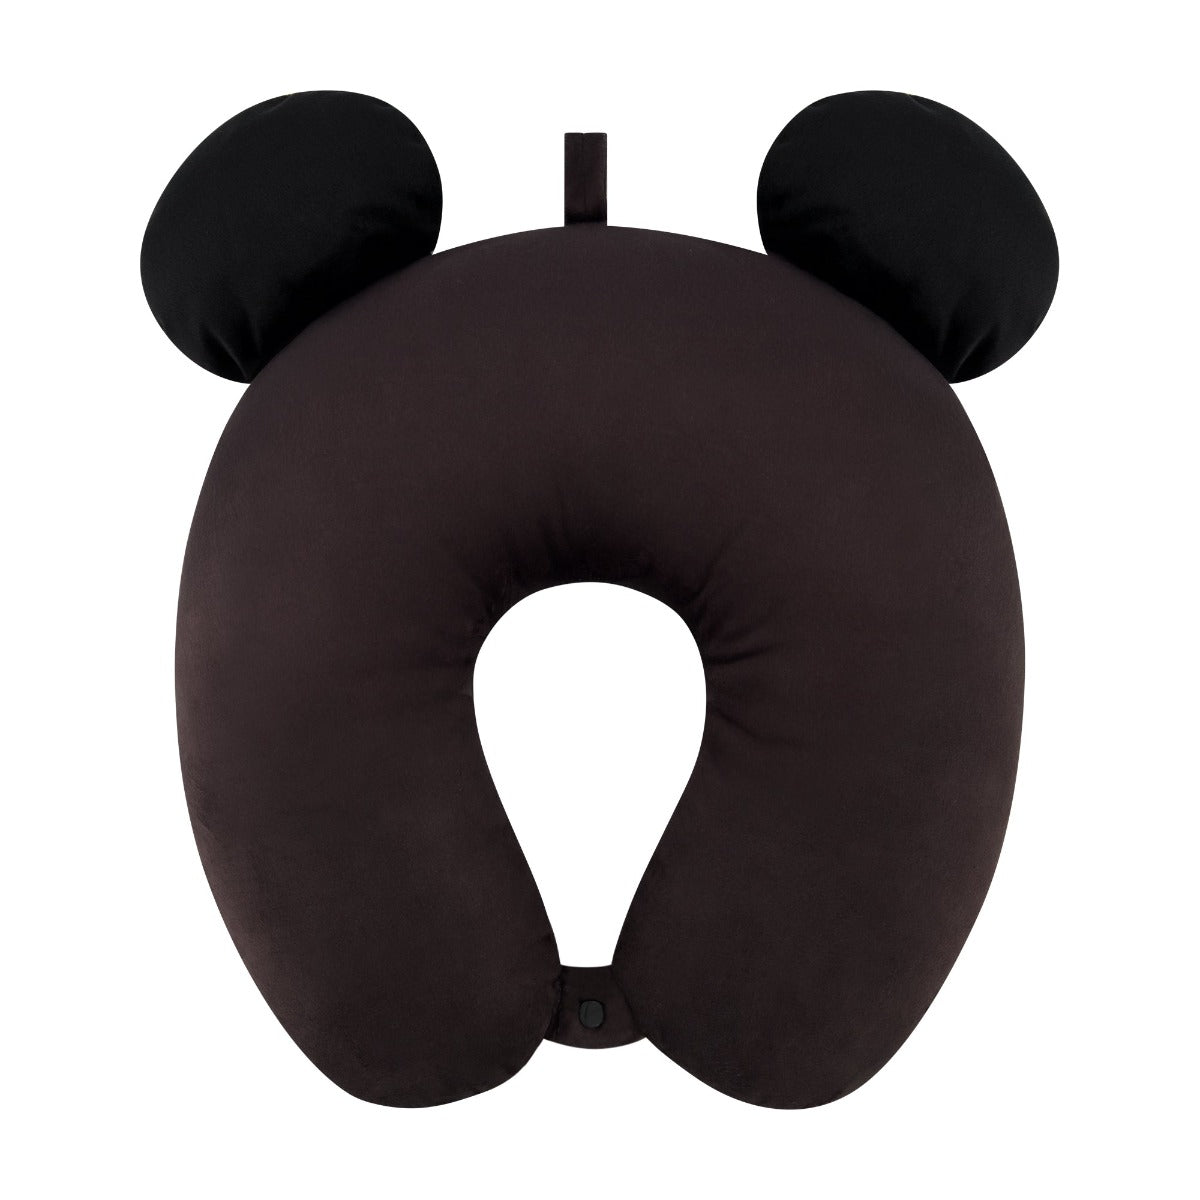 Black Ful Disney Mickey Mouse travel pillows with ears - best neck pillows for traveling